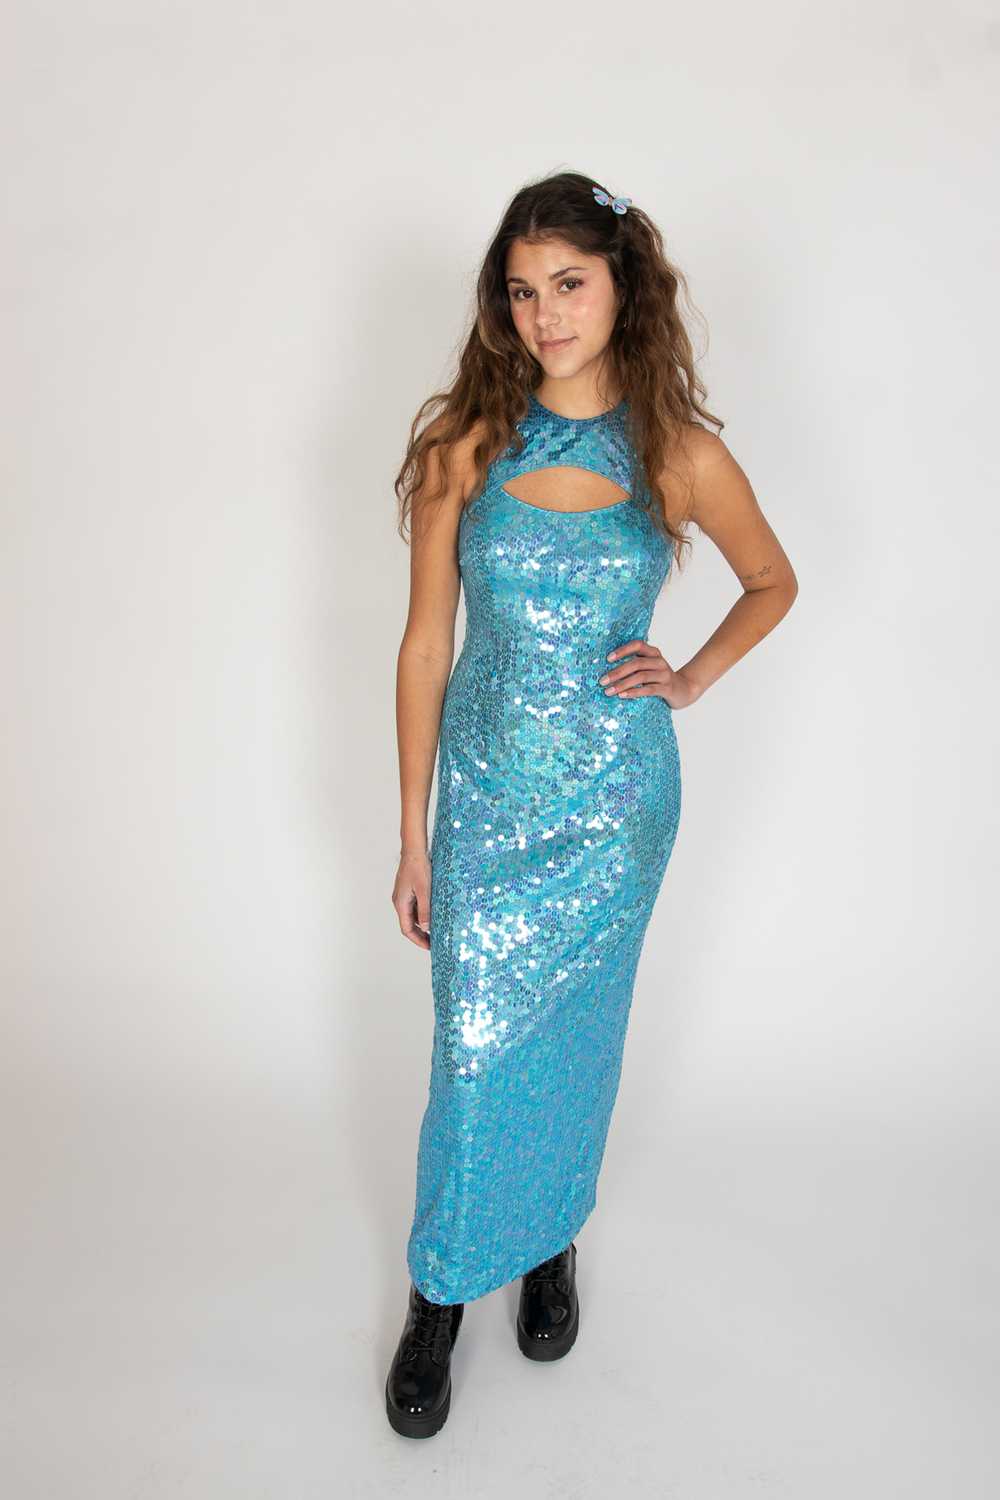 Vintage Adrianna Papell Blue Sequin Dress - image 4